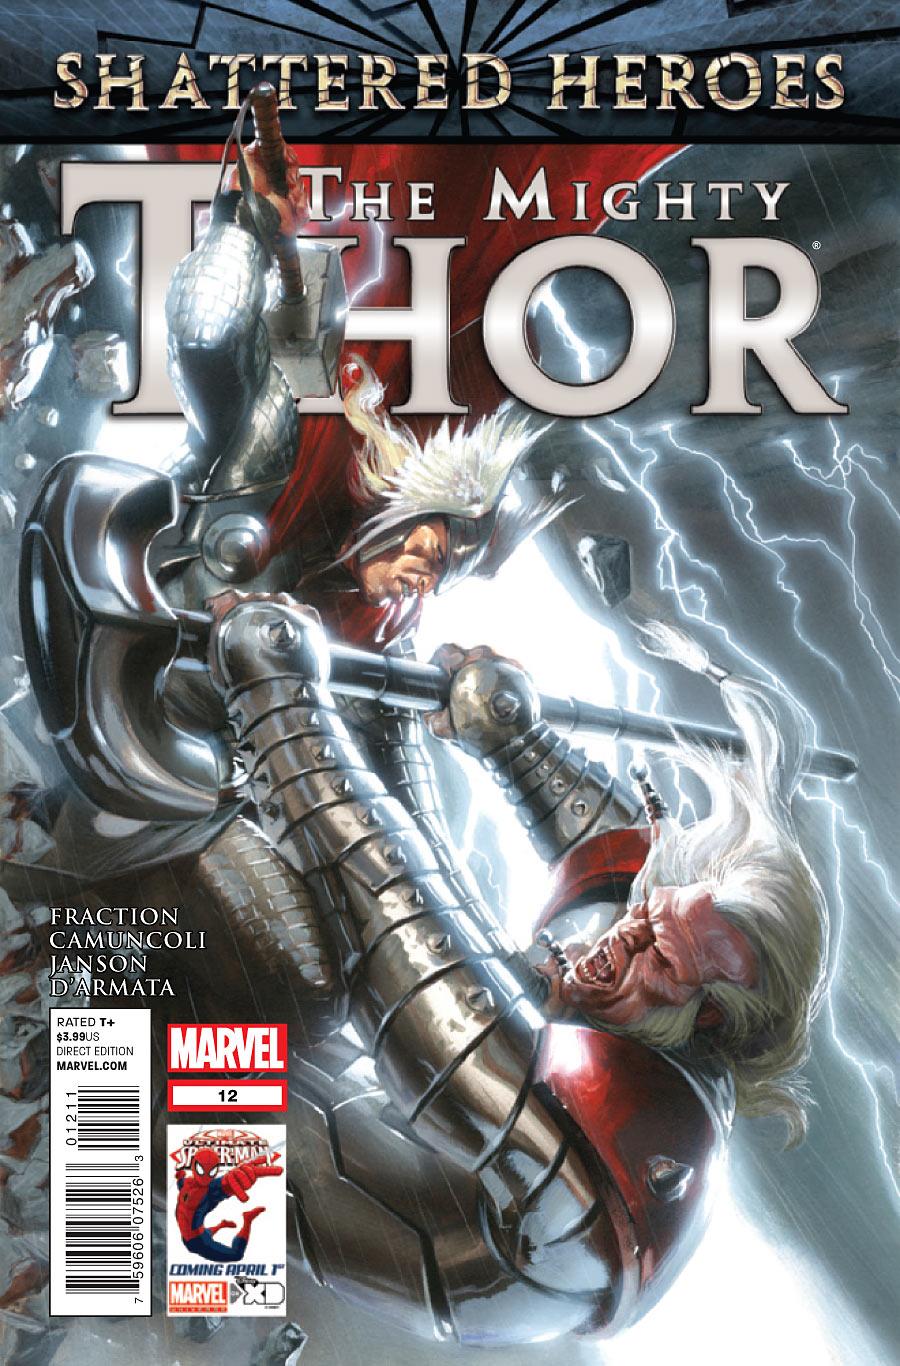 The Mighty Thor Vol. 1 #12